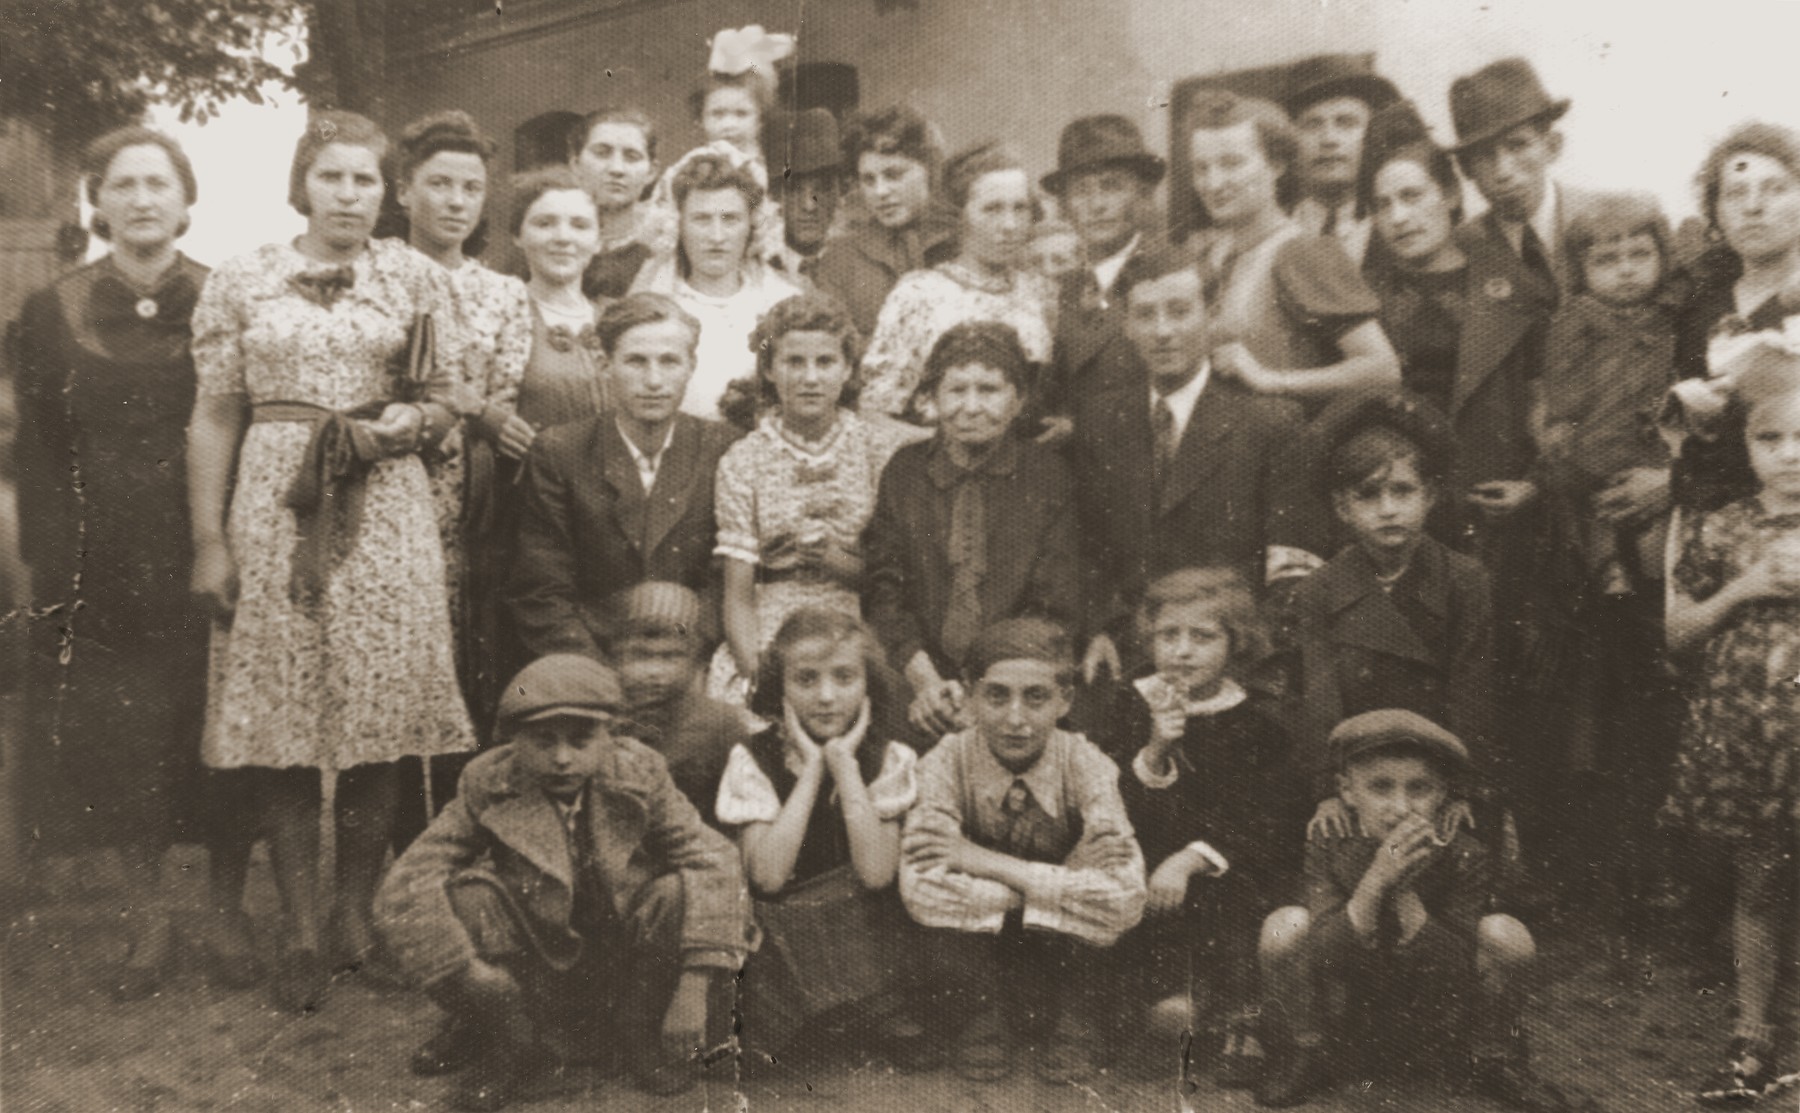 Family portrait  taken on the occasion of the wedding of Netl Moncznik, the cousin of Berl Moncznik.  

This was the last Jewish wedding in Niwka before the outbreak of the second World War.  Pictured in the front row from left to right are: Heniek Polturok (cousin); Jadzia Moncznik; Szlamek Moncznik and two unidentified children.  Sitting in the middle row are: Leon Moncznik (cousin); Dorka Moncznik; Jehudit Moncznik (grandmother) and Berl Moncznik.  Among those standing in the back row are Lea Moncznik (left) and the bride, Netl Moncznik.